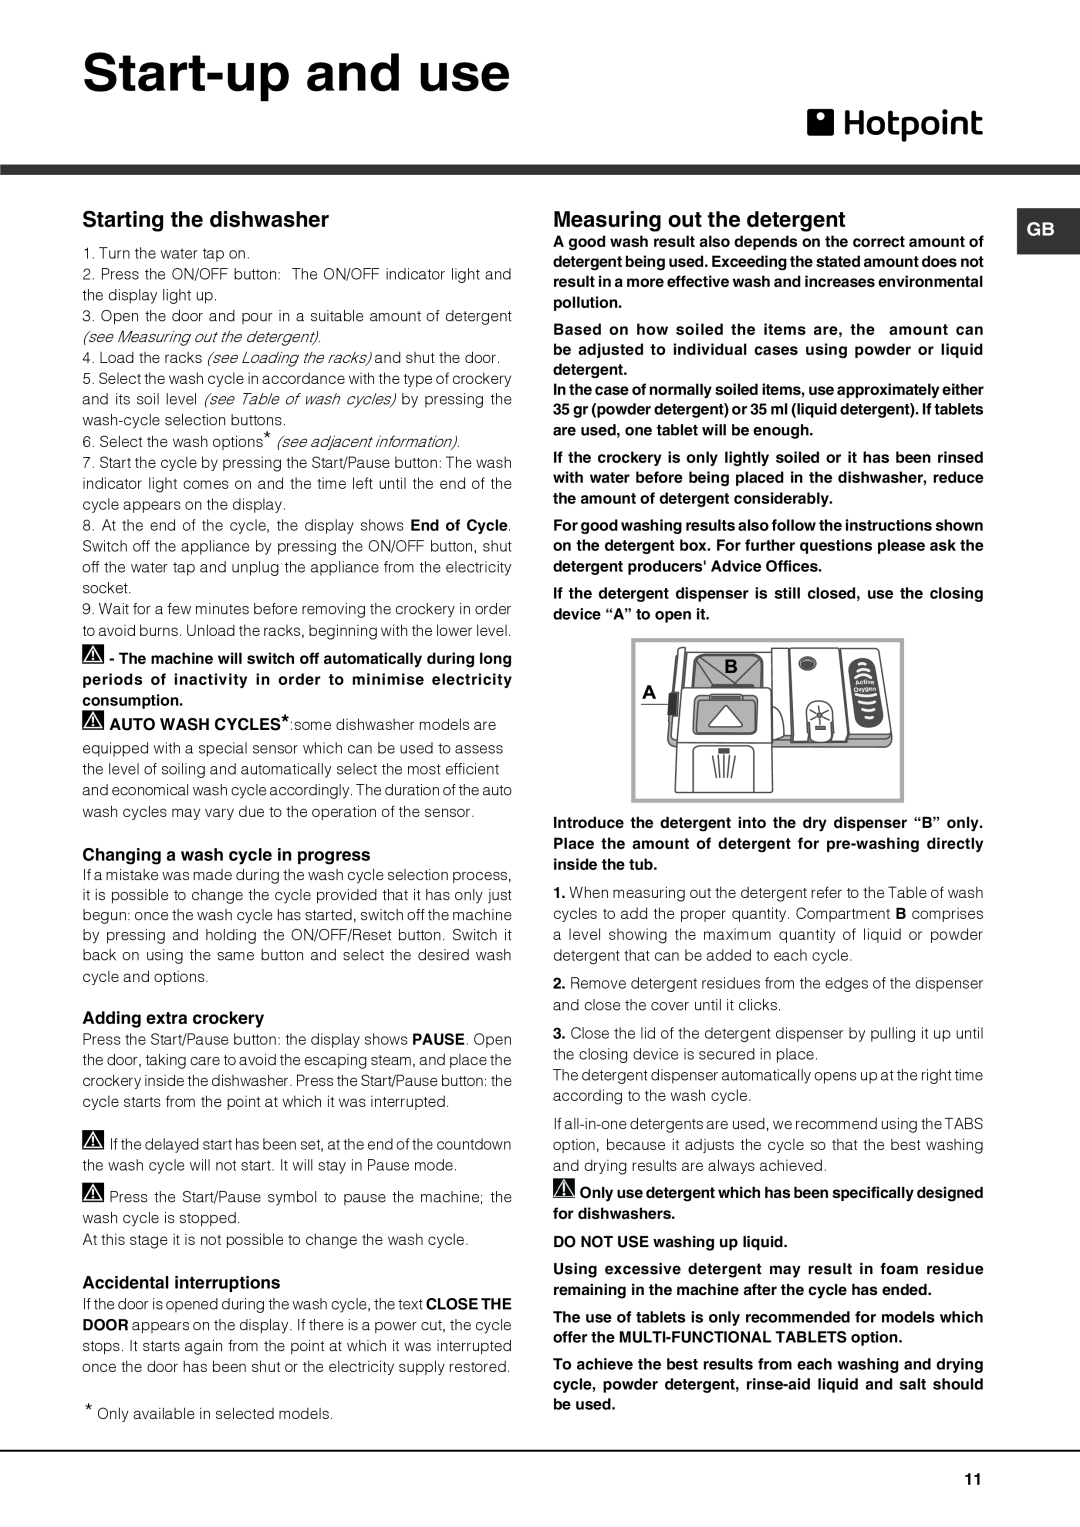 Hotpoint 51110 manual Start-up and use, Changing a wash cycle in progress, Adding extra crockery, Accidental interruptions 